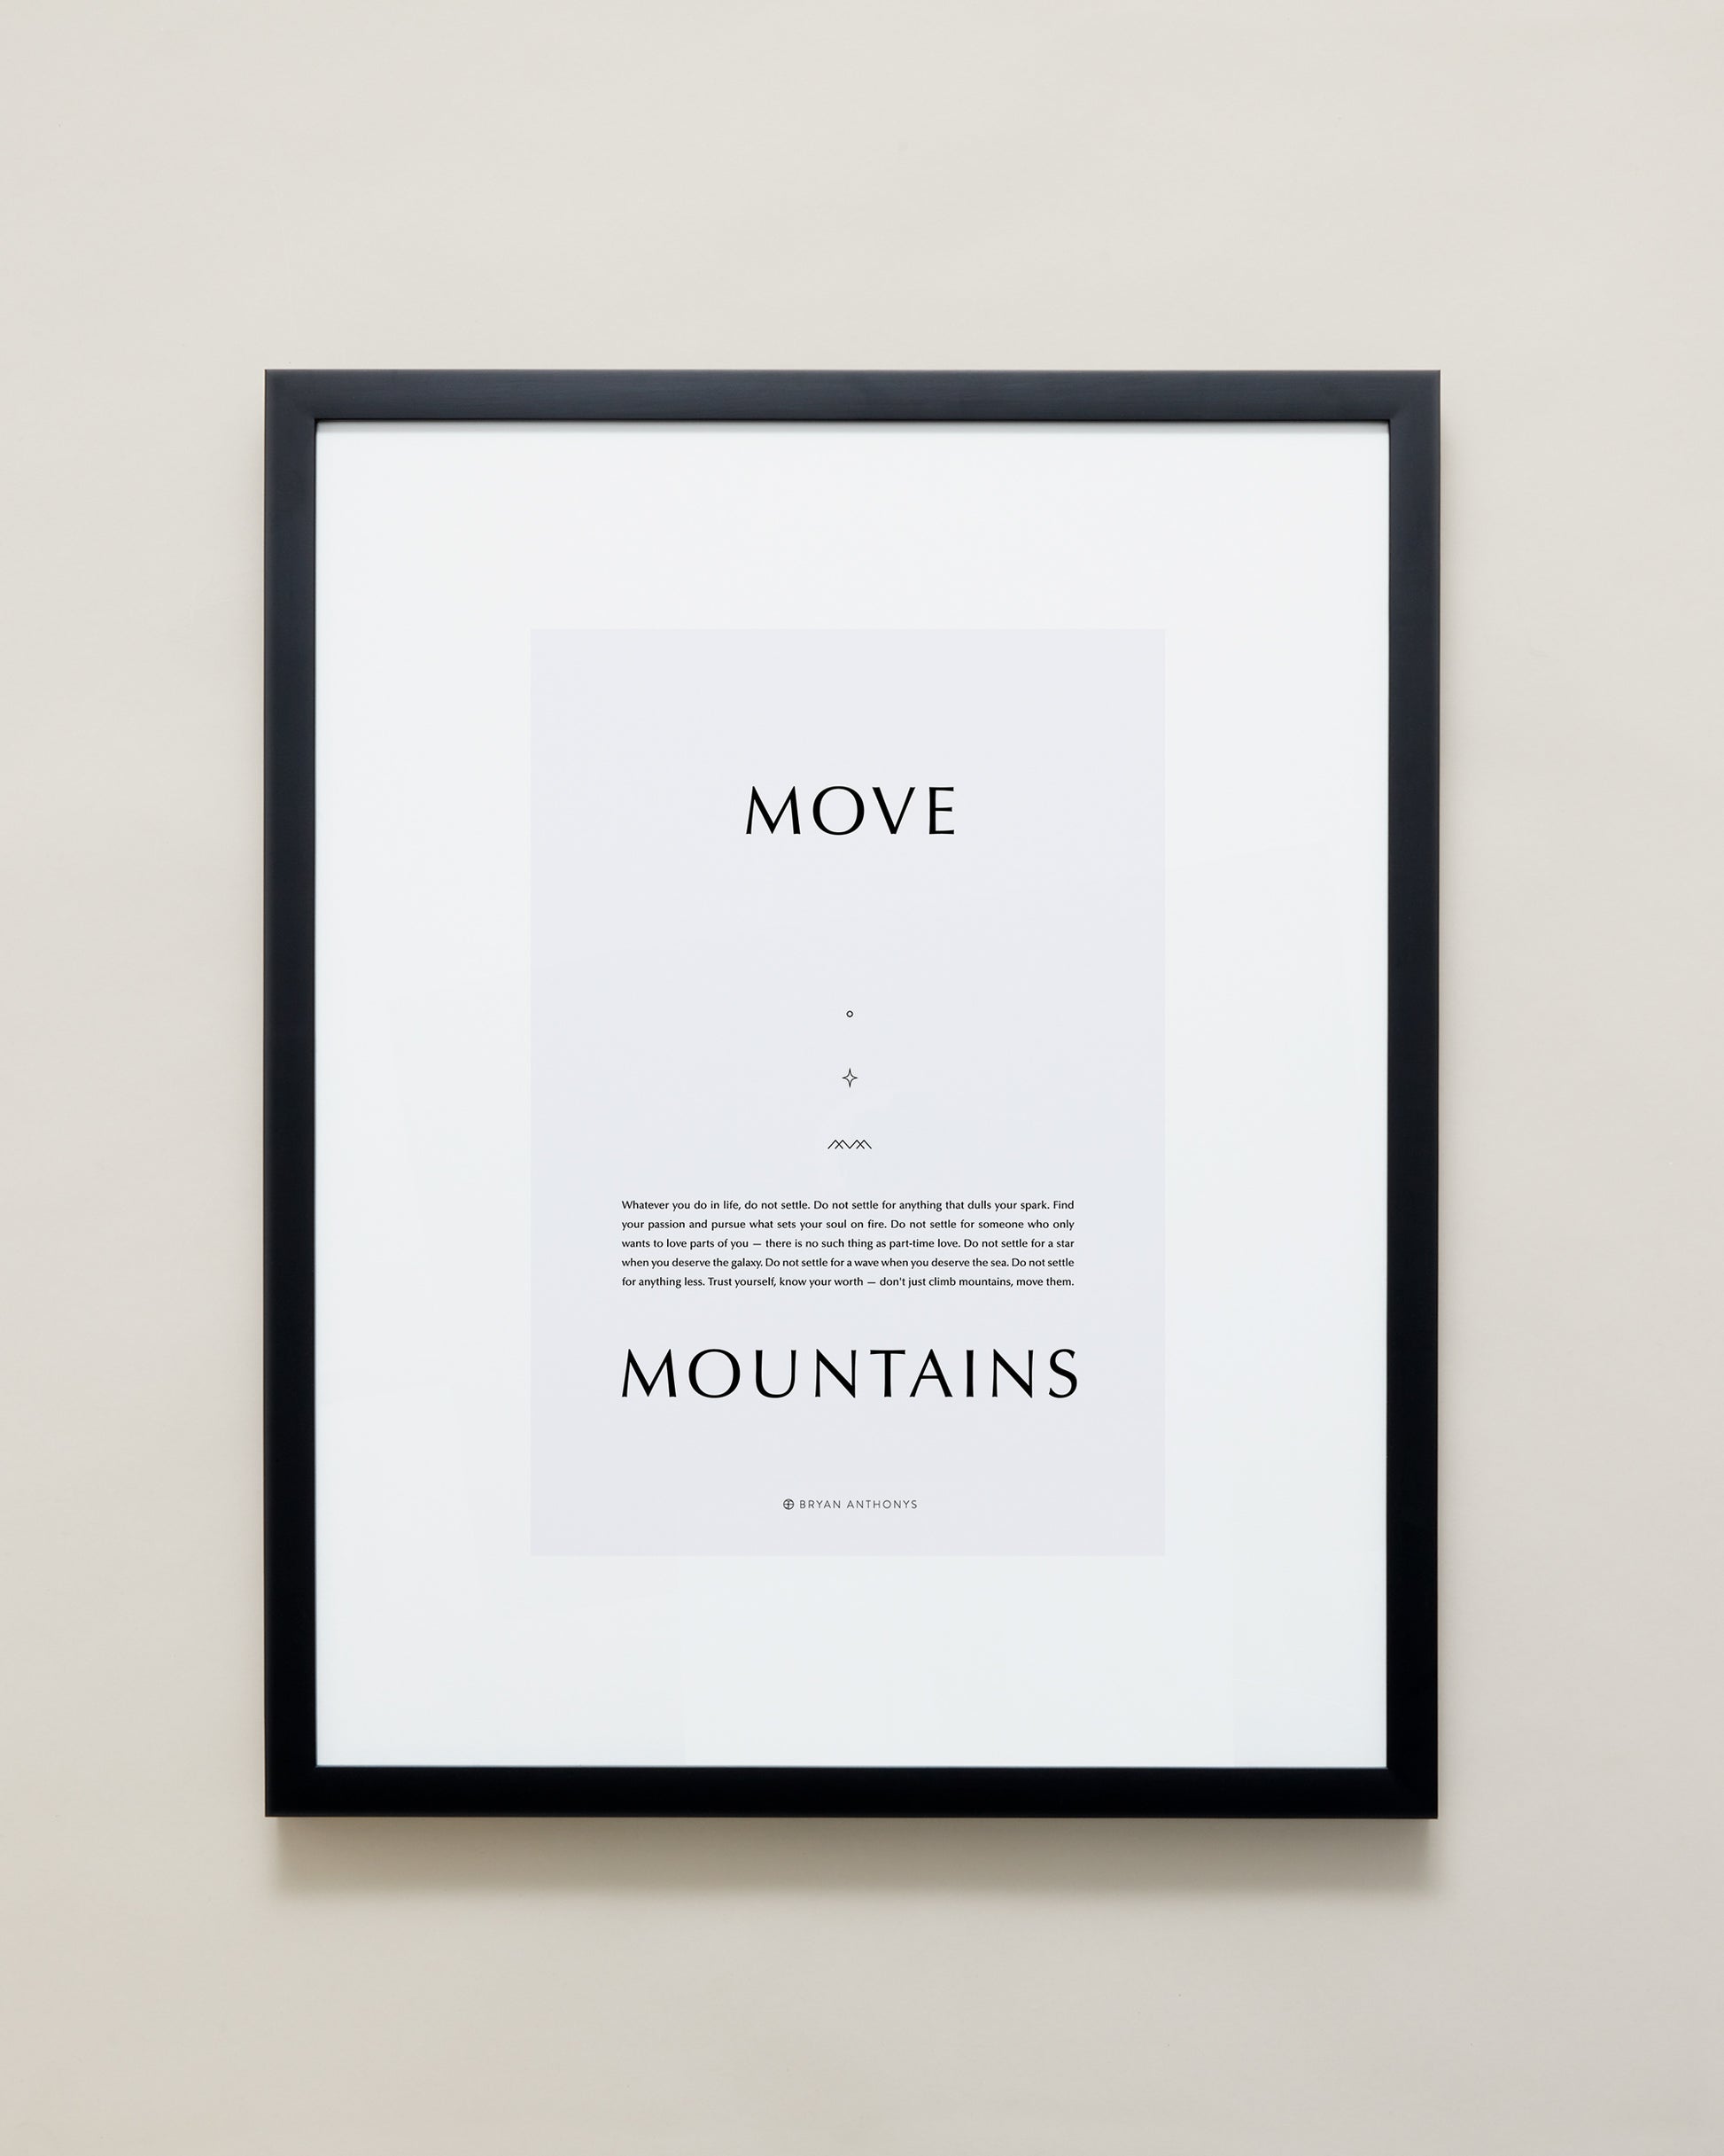 Bryan Anthonys Home Decor Purposeful Prints Move Mountains Iconic Framed Print Gray Art With Black Frame 16x20